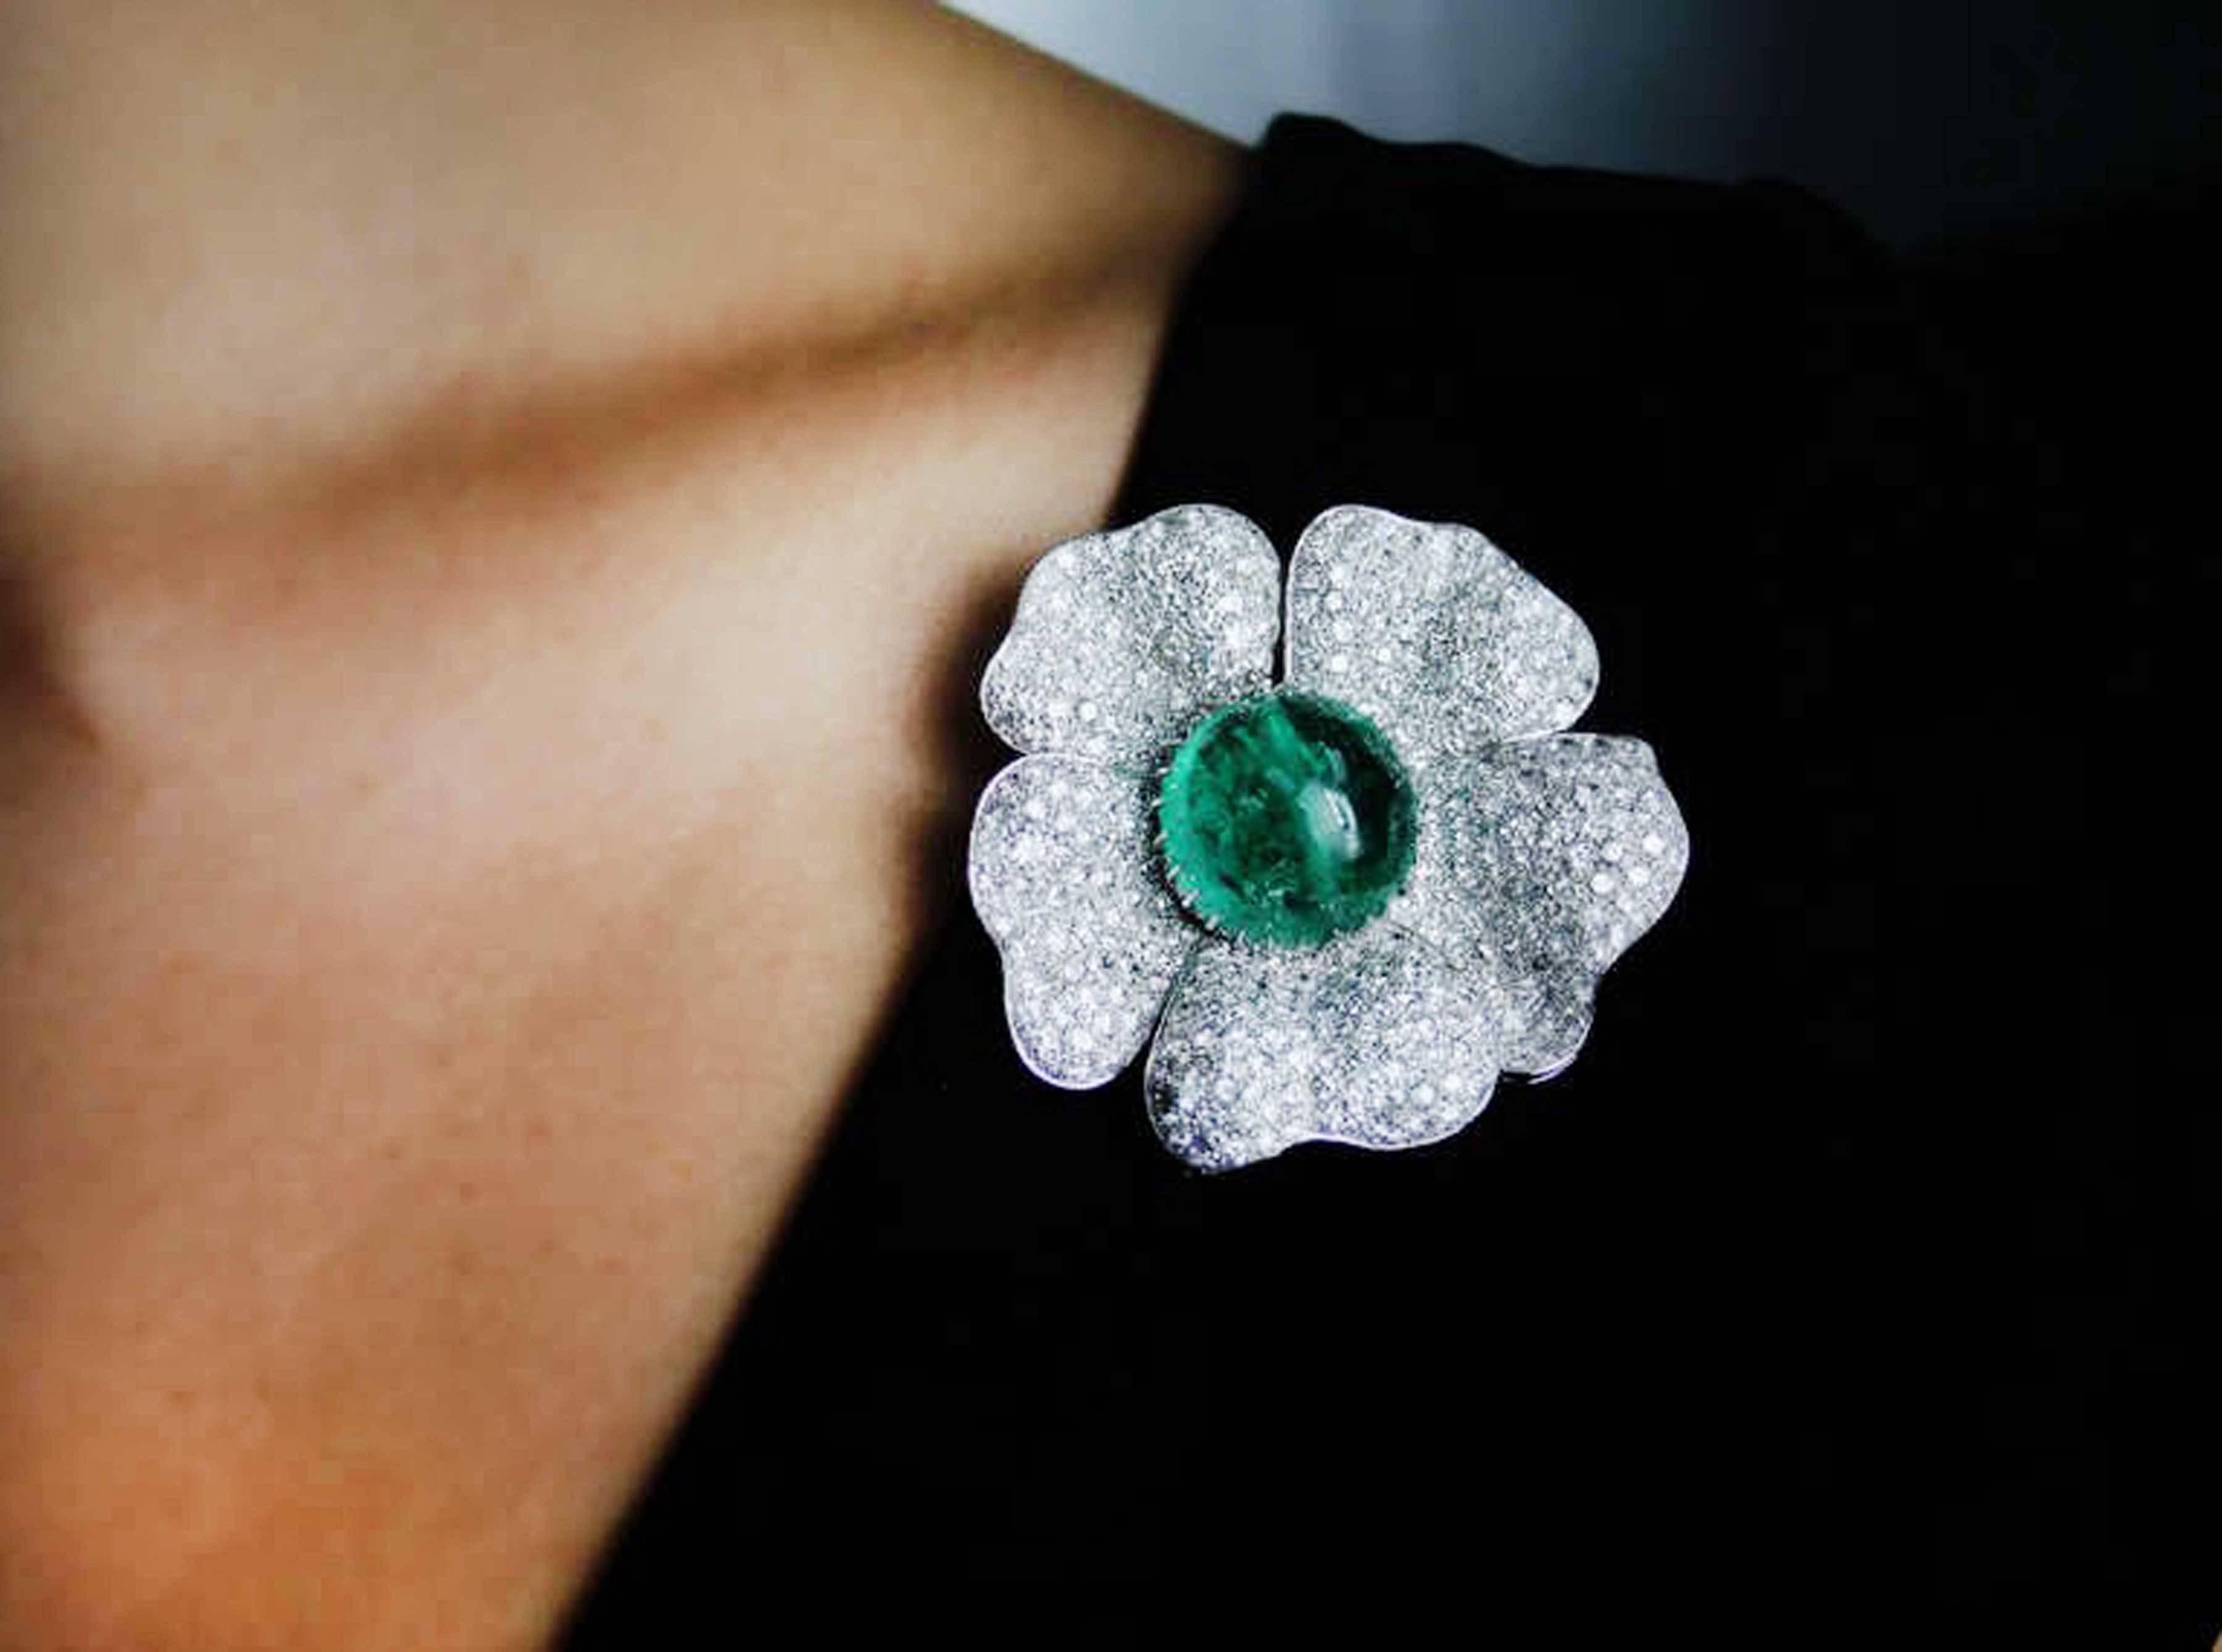 This stunning platinum brooch features a natural cabochon cut emerald weighing 33.93 carats set in a flower motif brooch which has 340 bead set round brilliant cut diamonds with an estimated total weight of 15 carats.

This brooch was owned by the